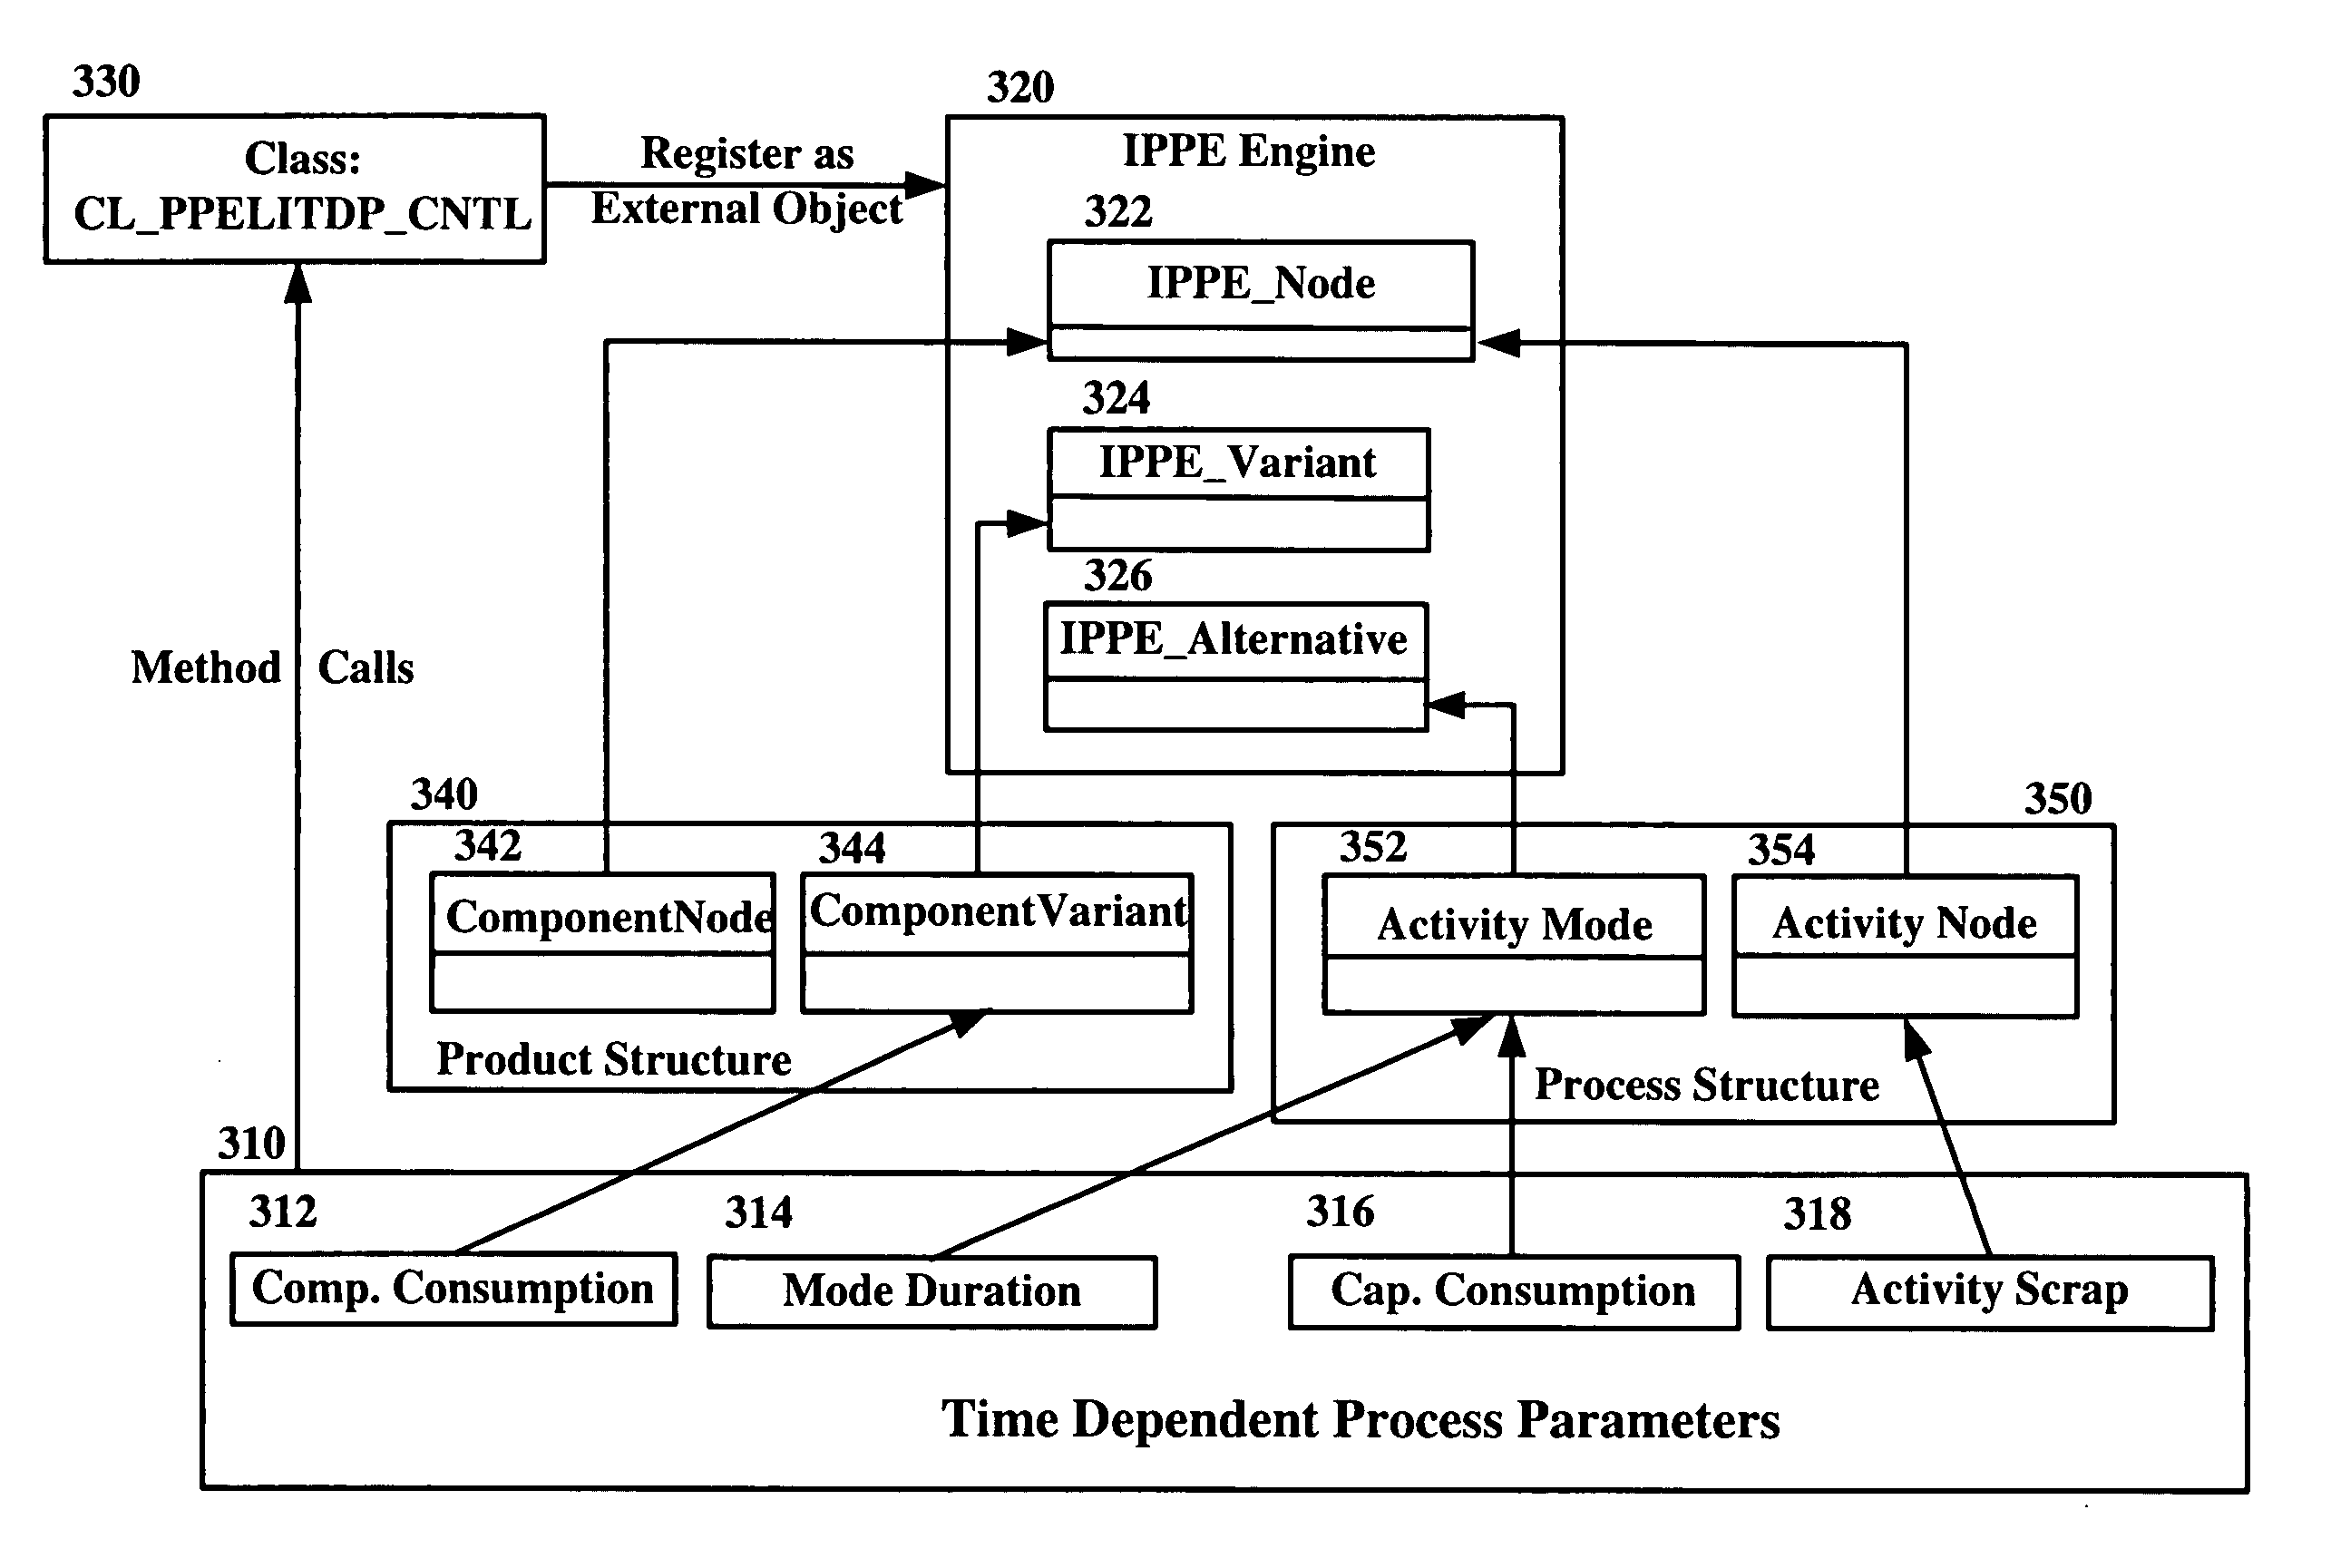 Interfaces from external systems to time dependent process parameters in integrated process and product engineering